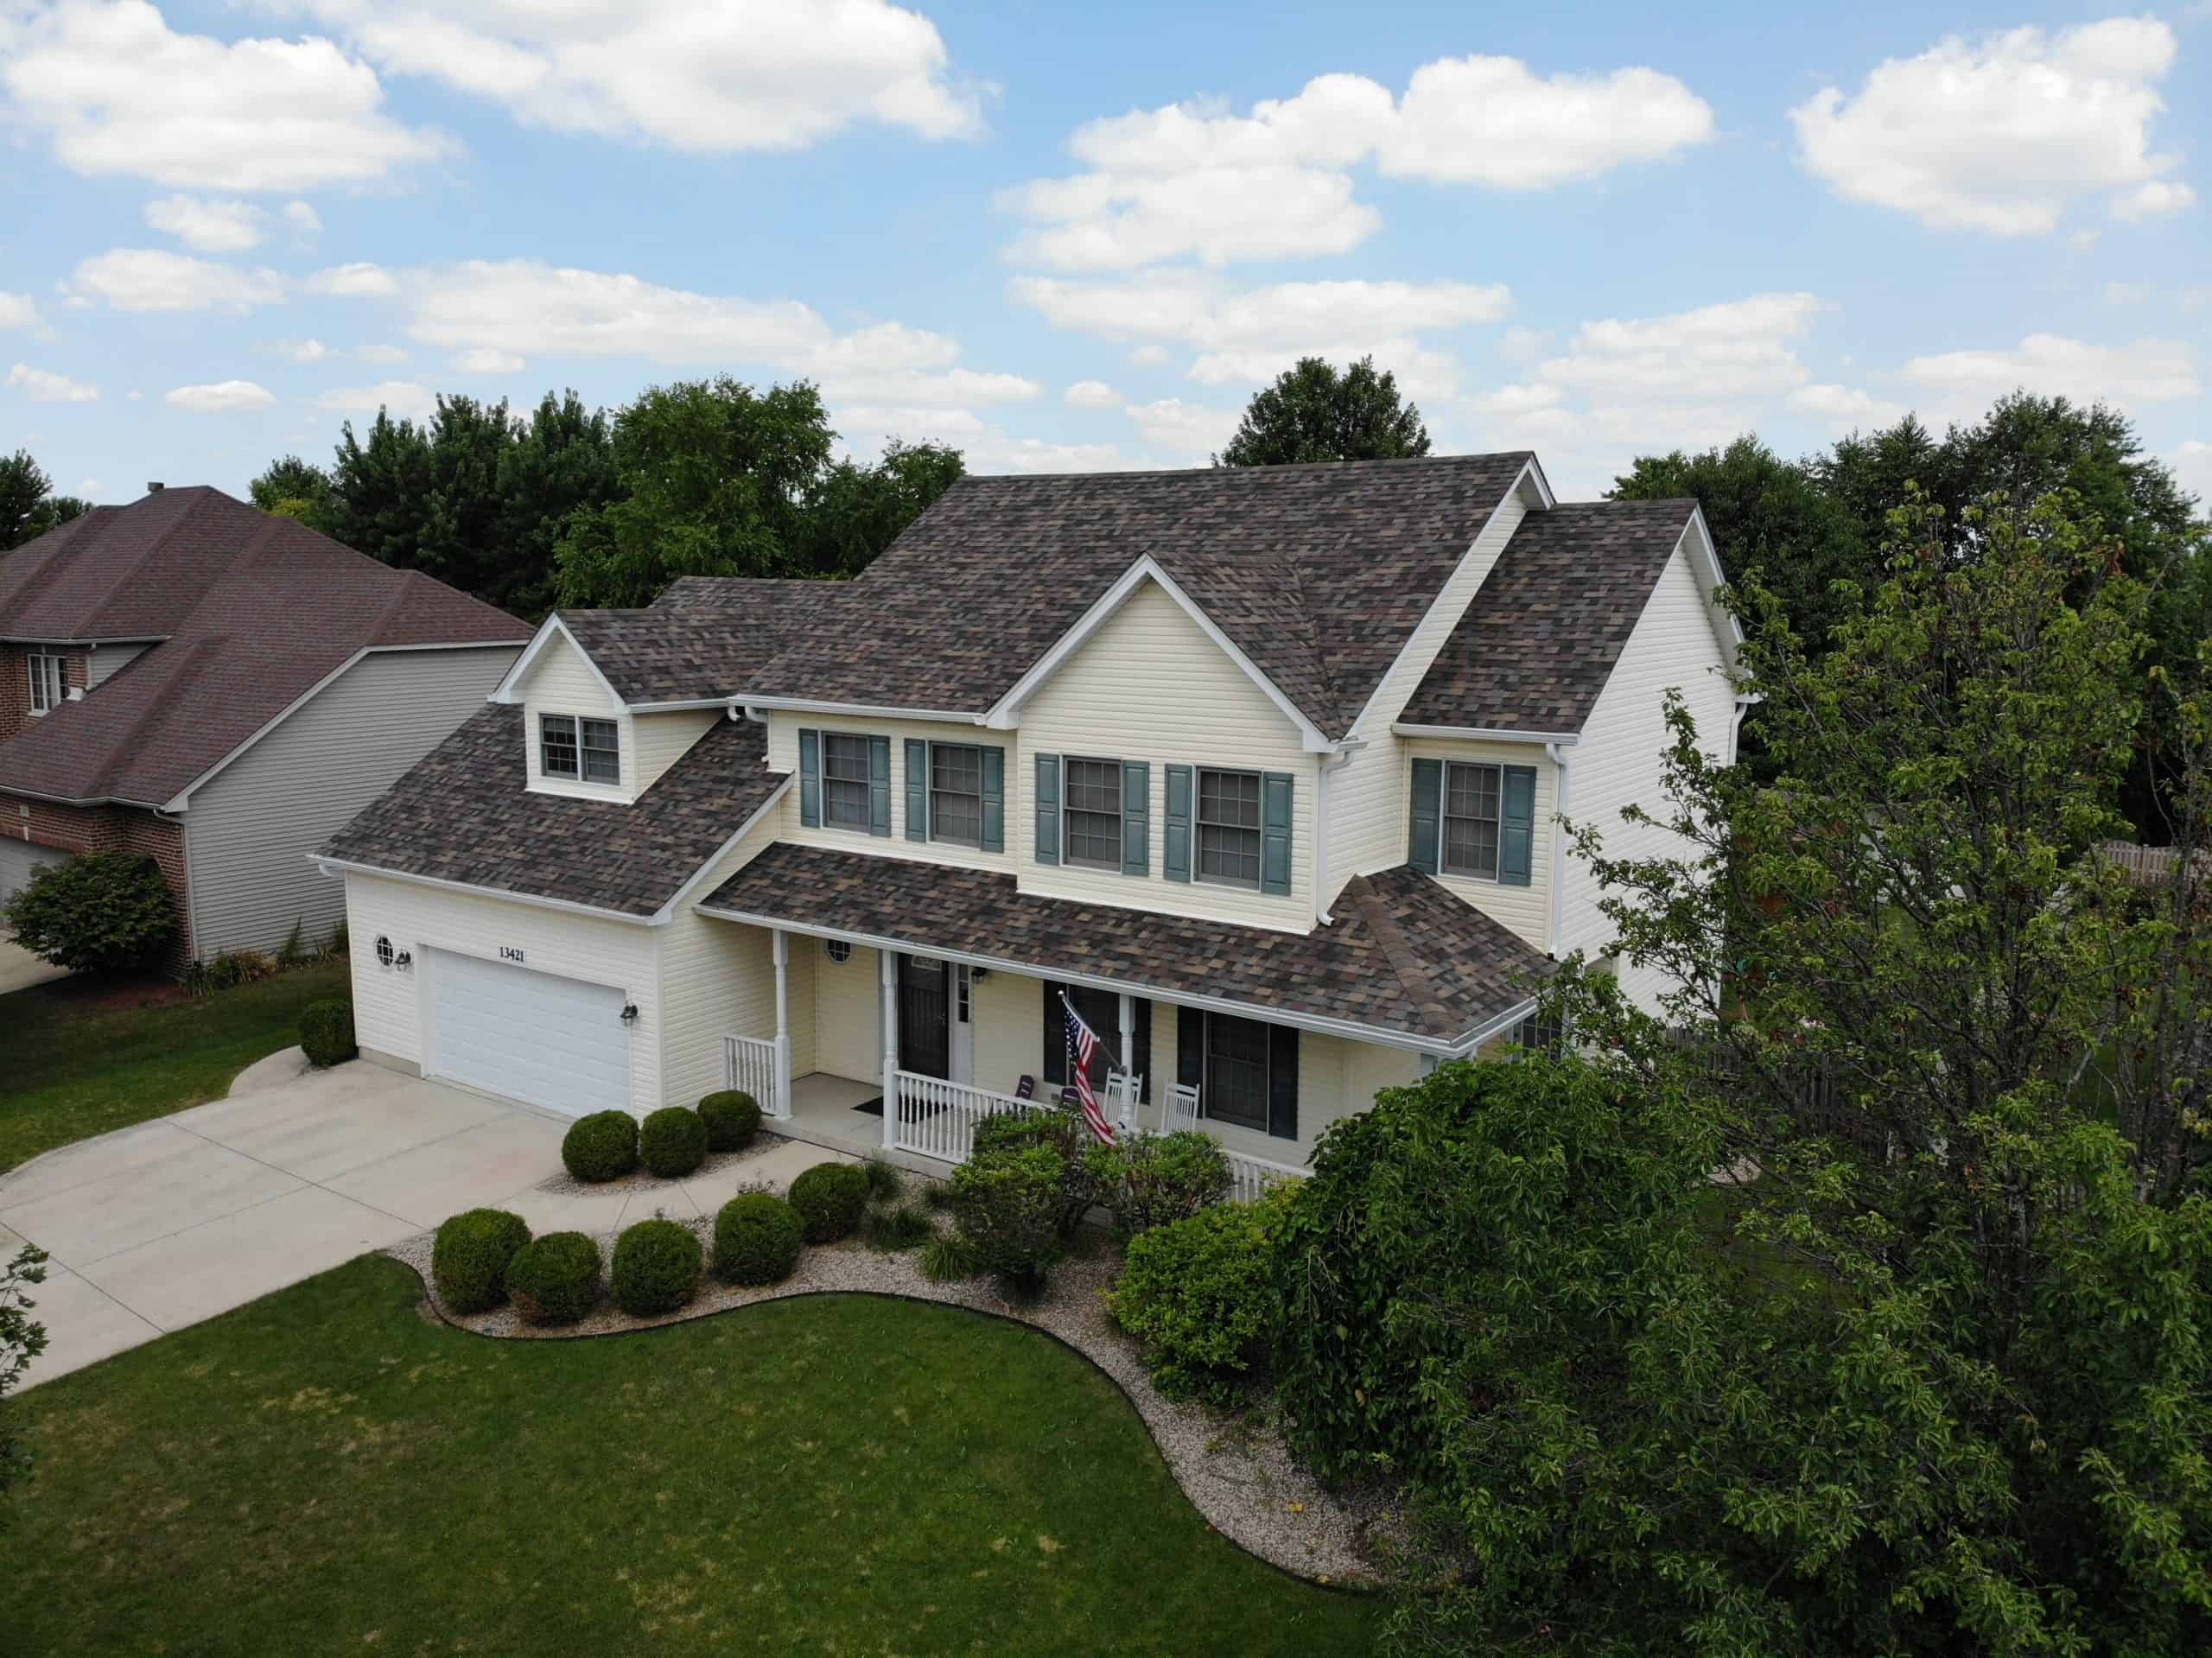 Aerial Shot Of House With Brown Shingles